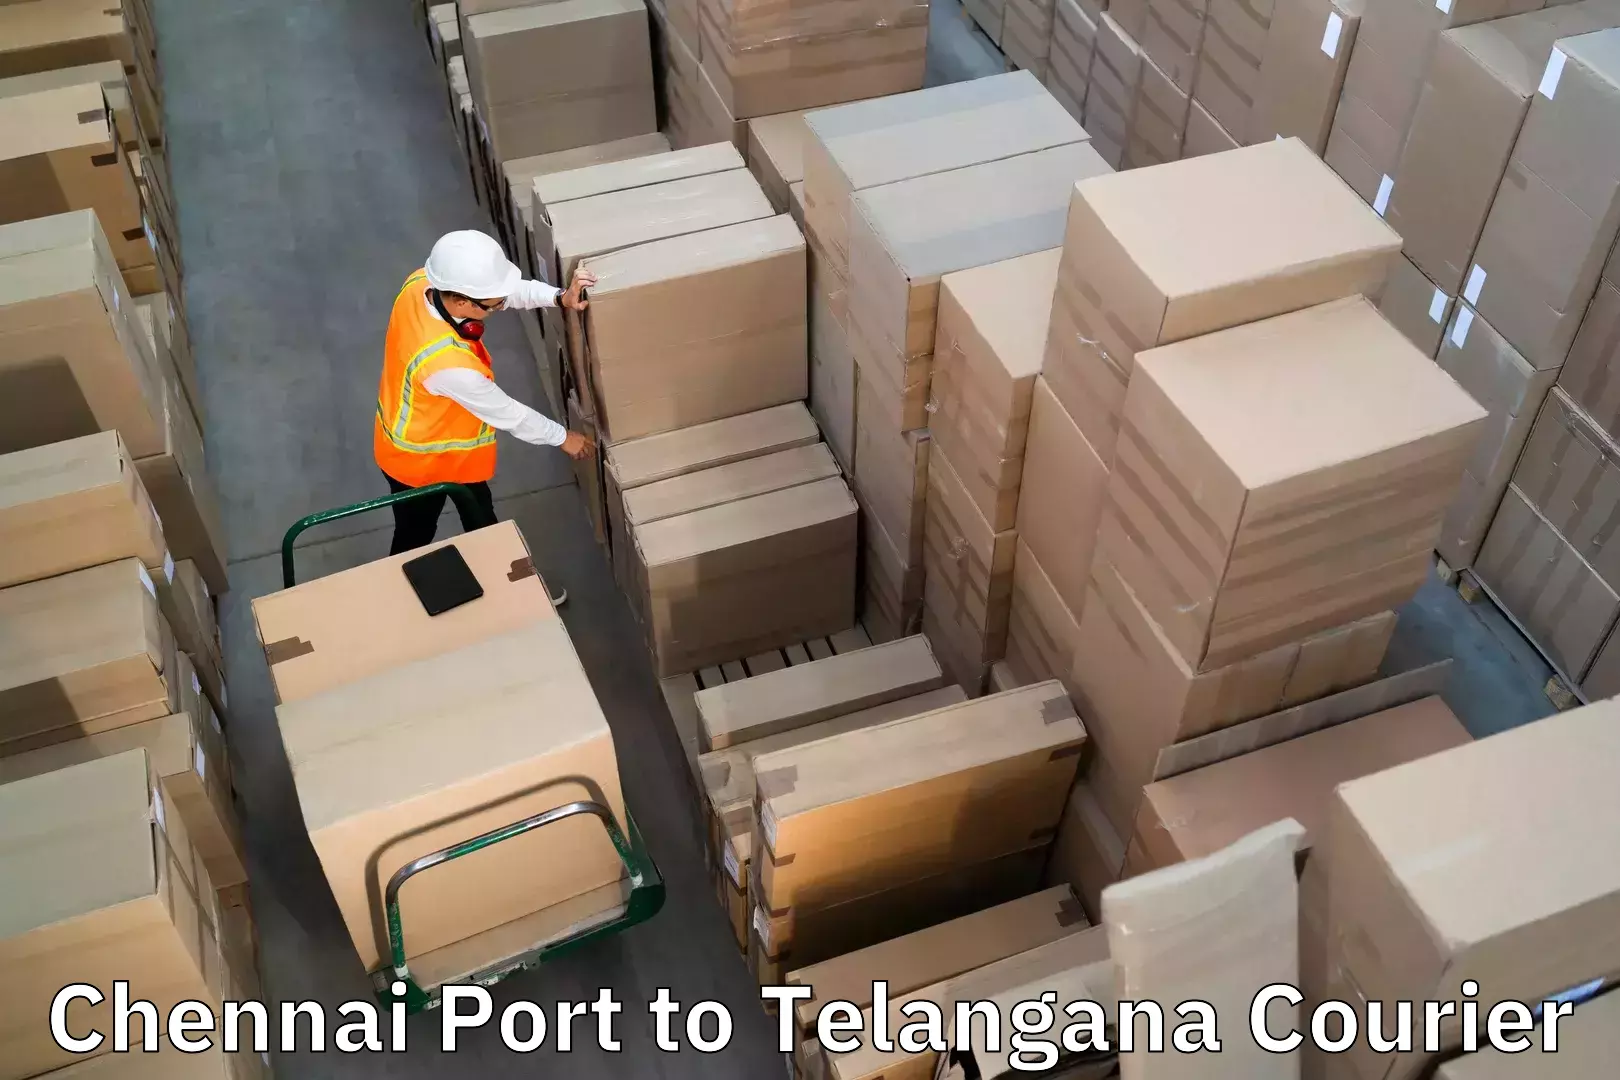 Luggage delivery operations in Chennai Port to Manneguda